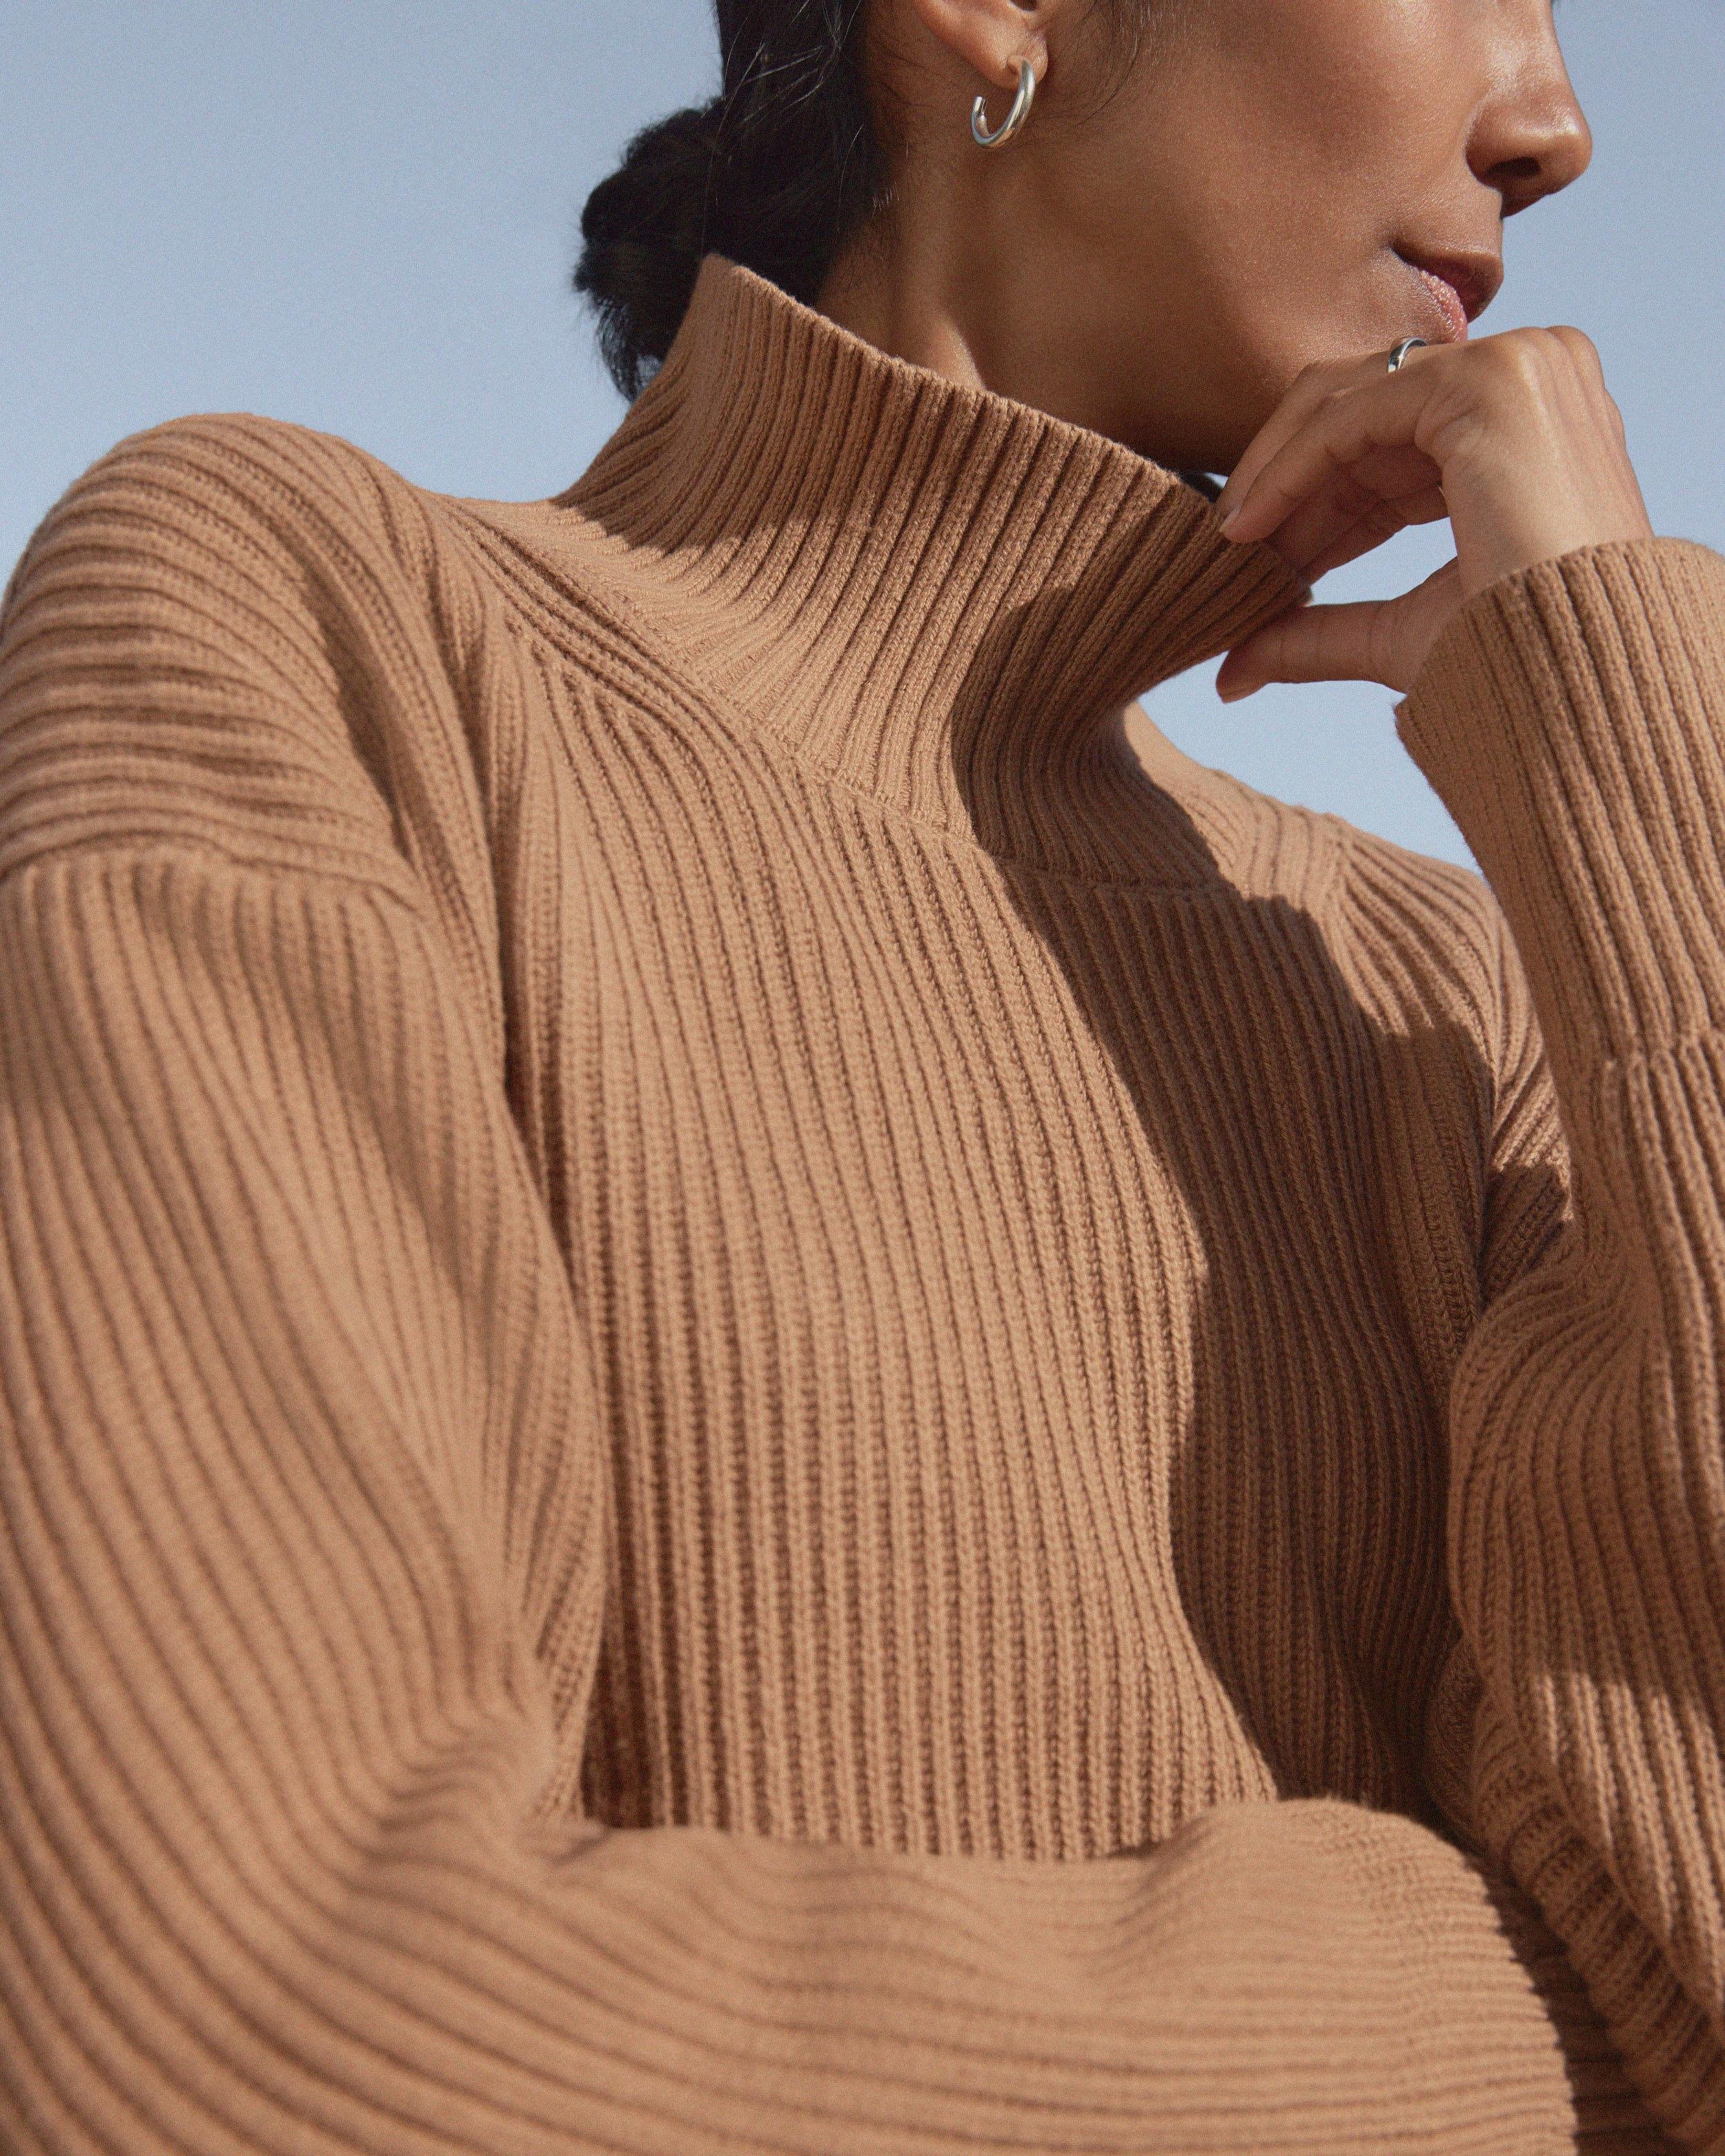 The Organic Cotton Ribbed Turtleneck by EVERLANE